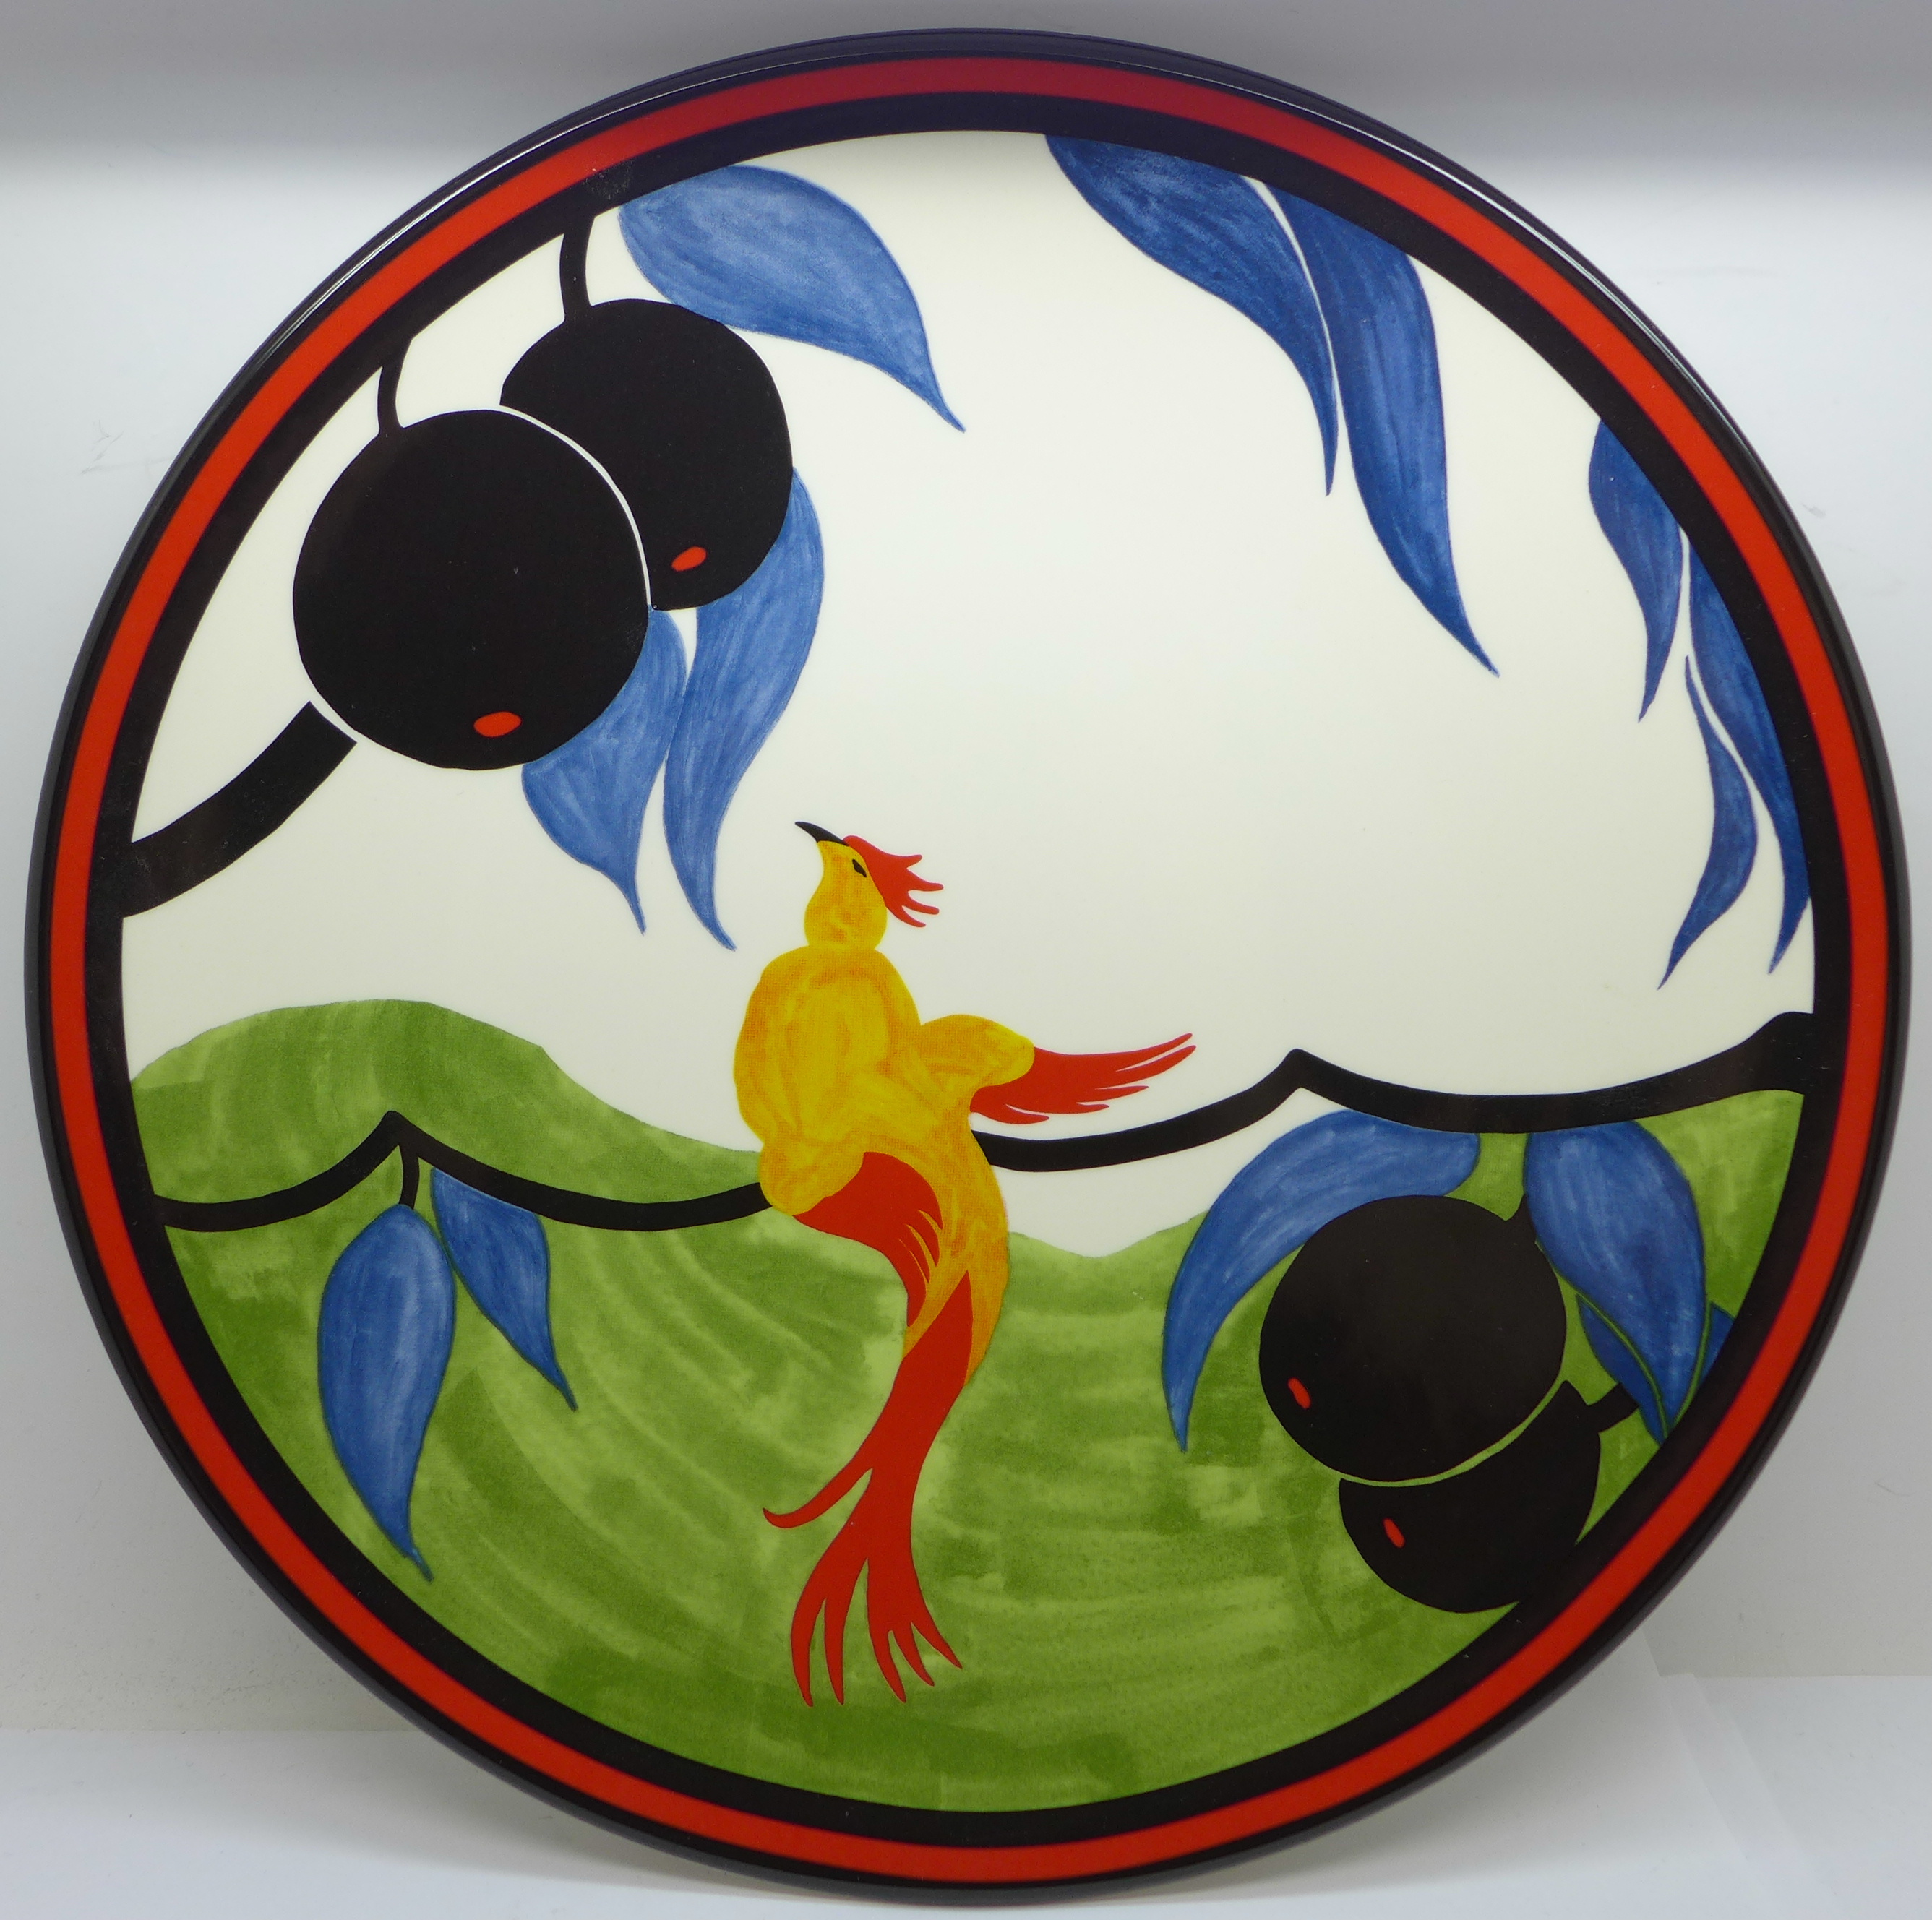 A Wedgwood Bradford Exchange Clarice Cliff Centenary Bird of Paradise plate, limited edition, with